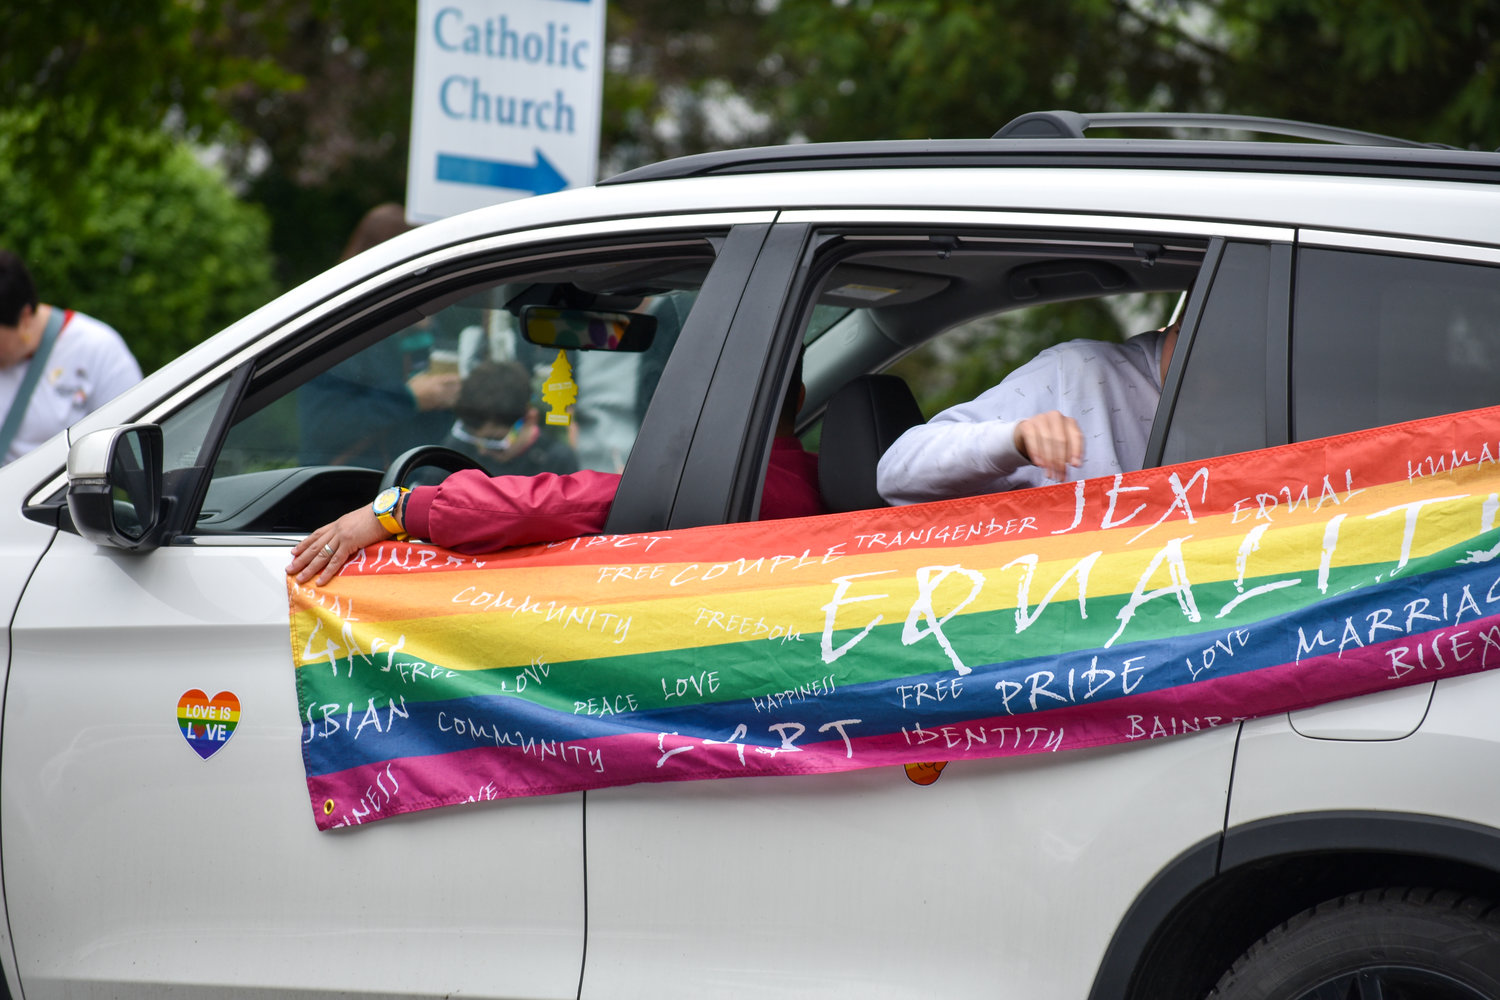 A rainbow flag calling for equality adorns this SUV taking part in Cazenovia's pride parade on Saturday.